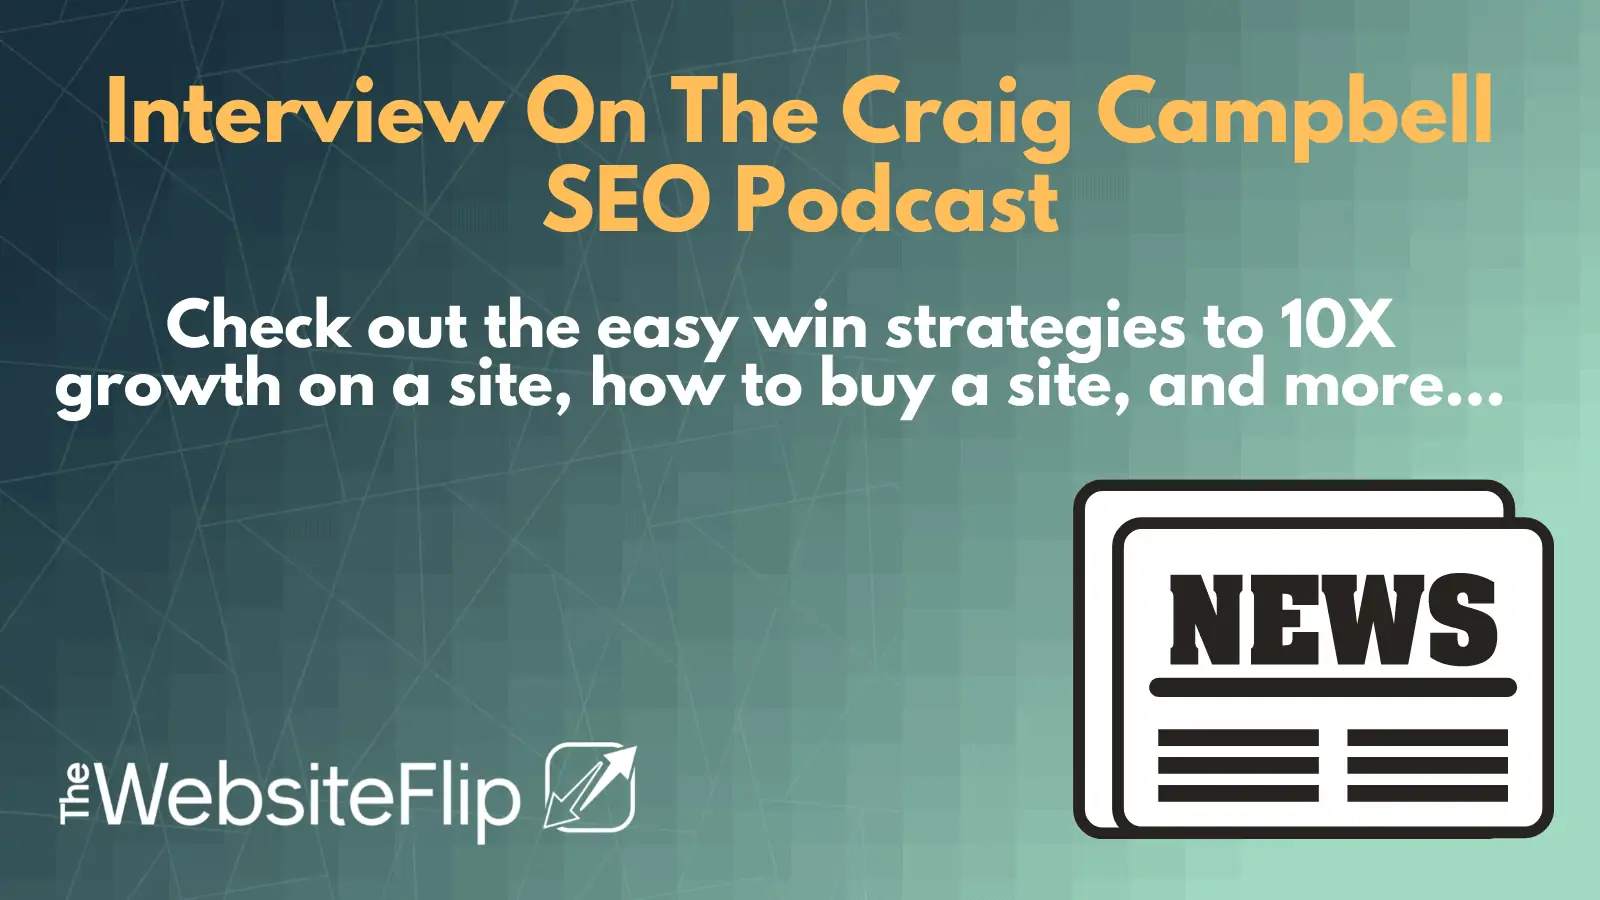 Interview On The Craig Campbell SEO Podcast